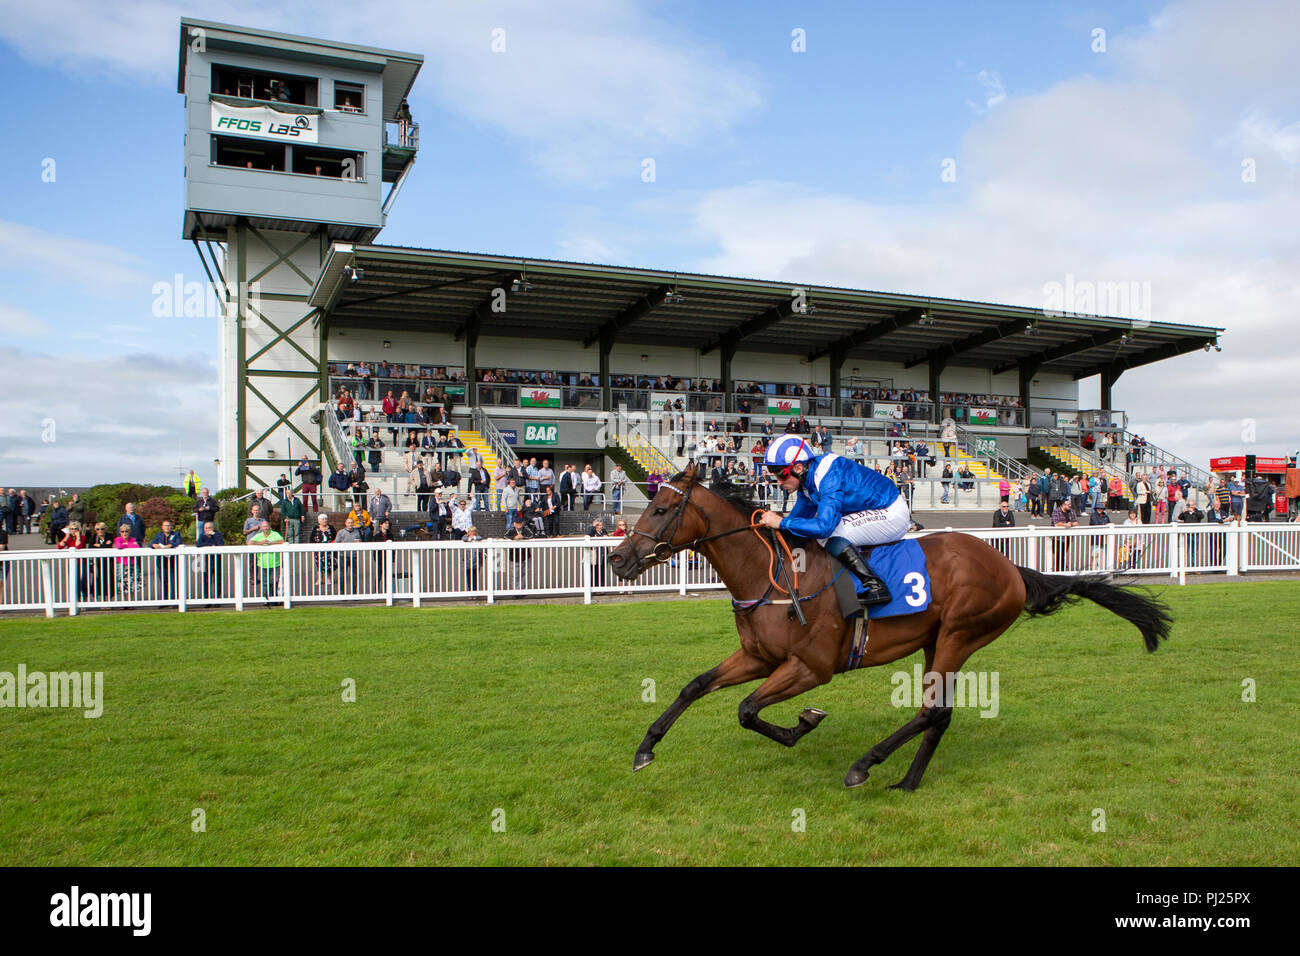 Racehorse Wufud ridden by jockey Dane O'Neill on the way to winning a race at Ffos Las Stock Photo